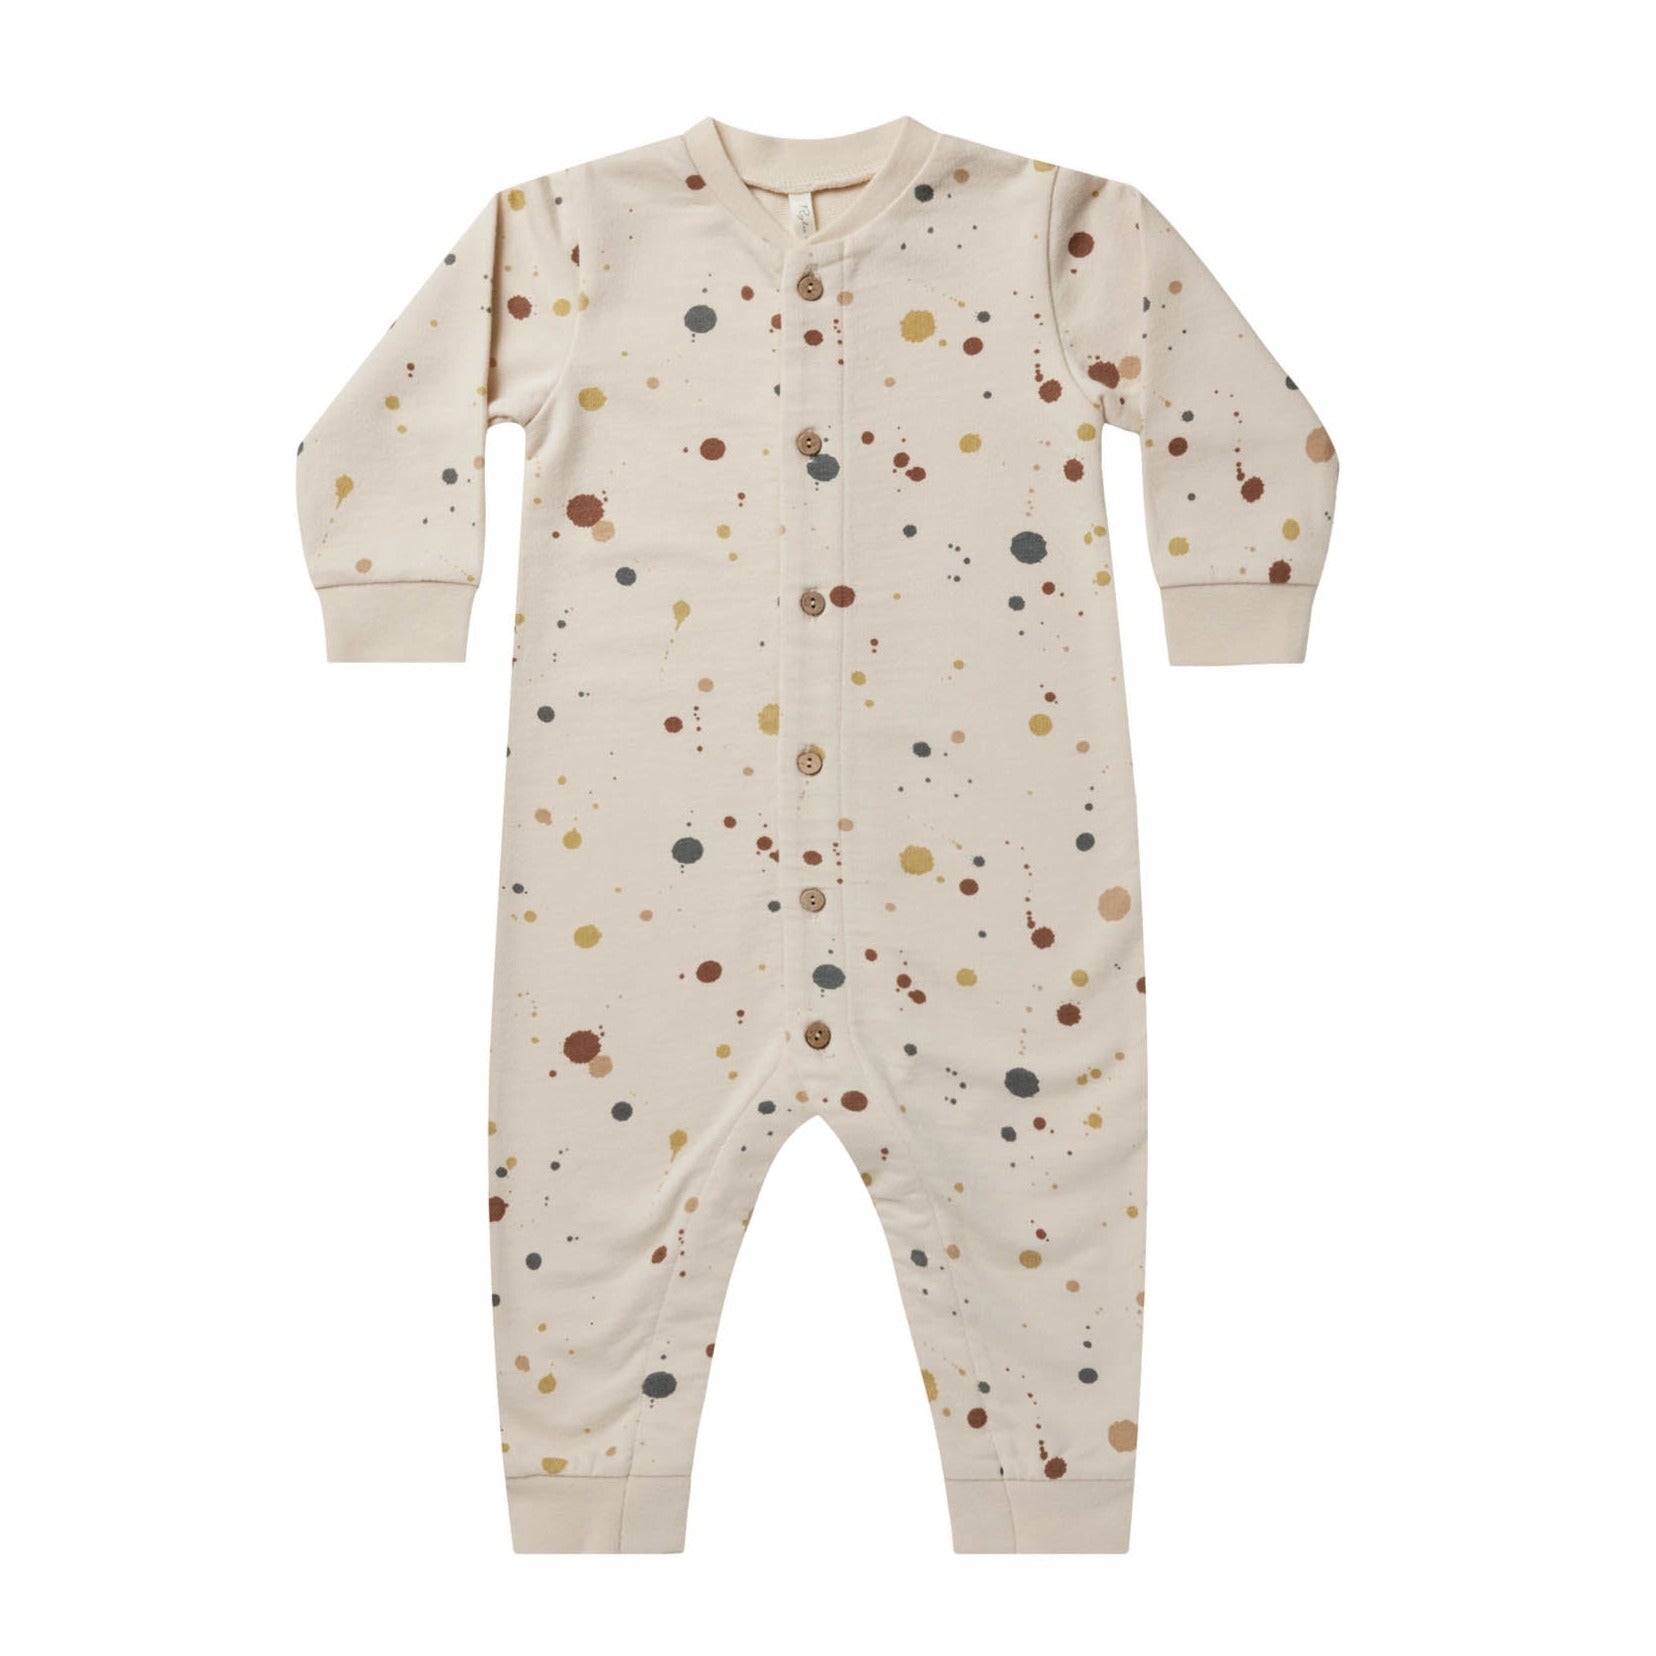 Rylee and Cru baby jumpsuit with splatter print at Bonjour Baby Baskets